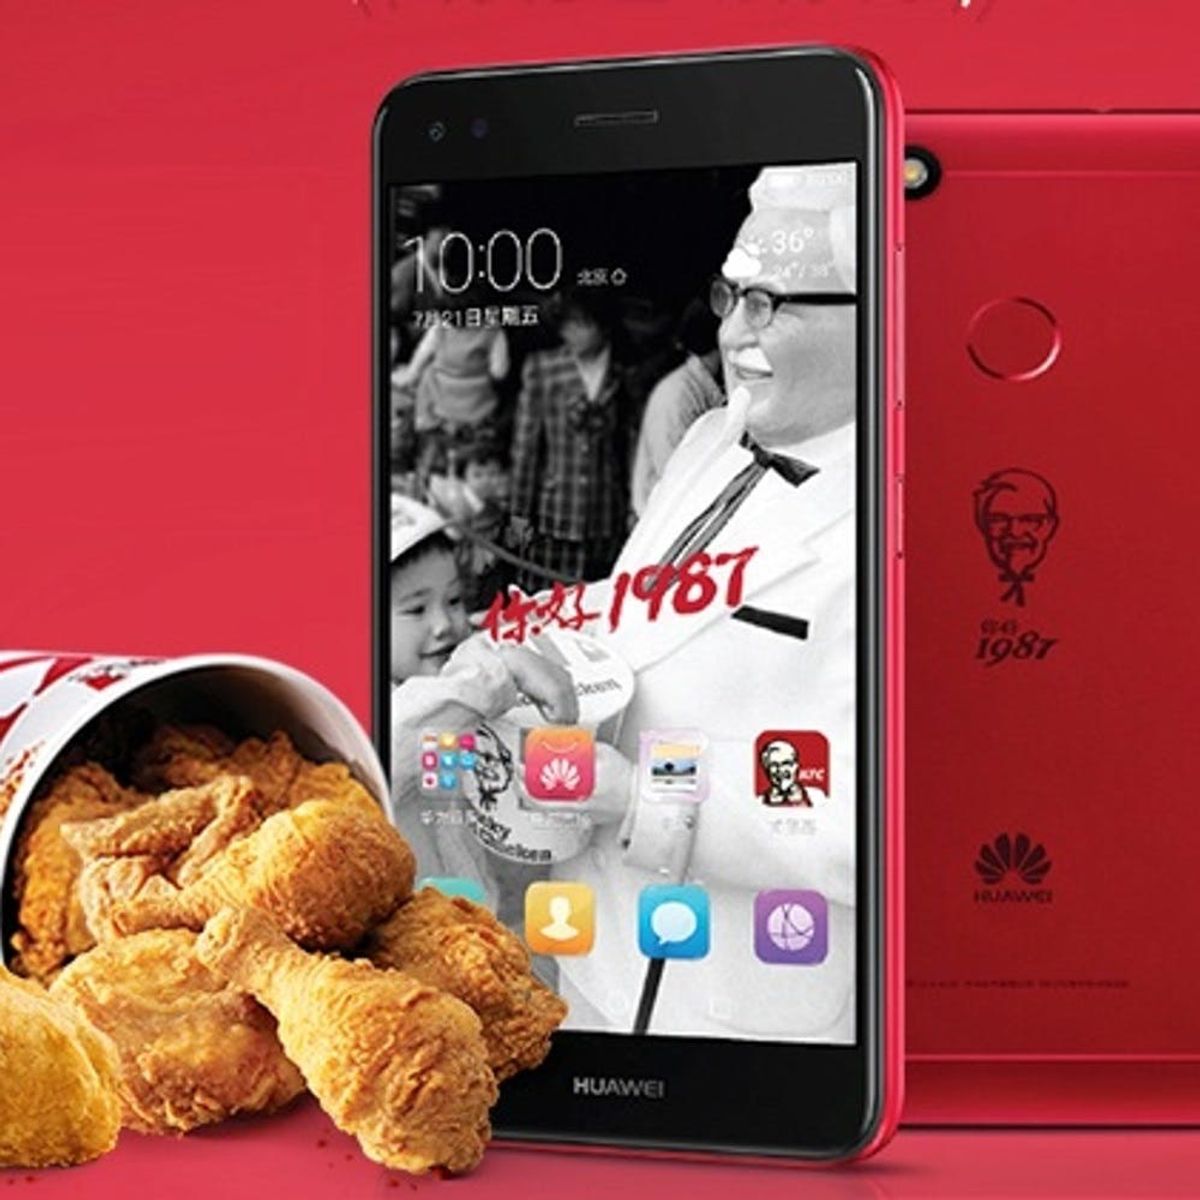 KFC Is Releasing a Smartphone and It’s Actually Kind of Cool